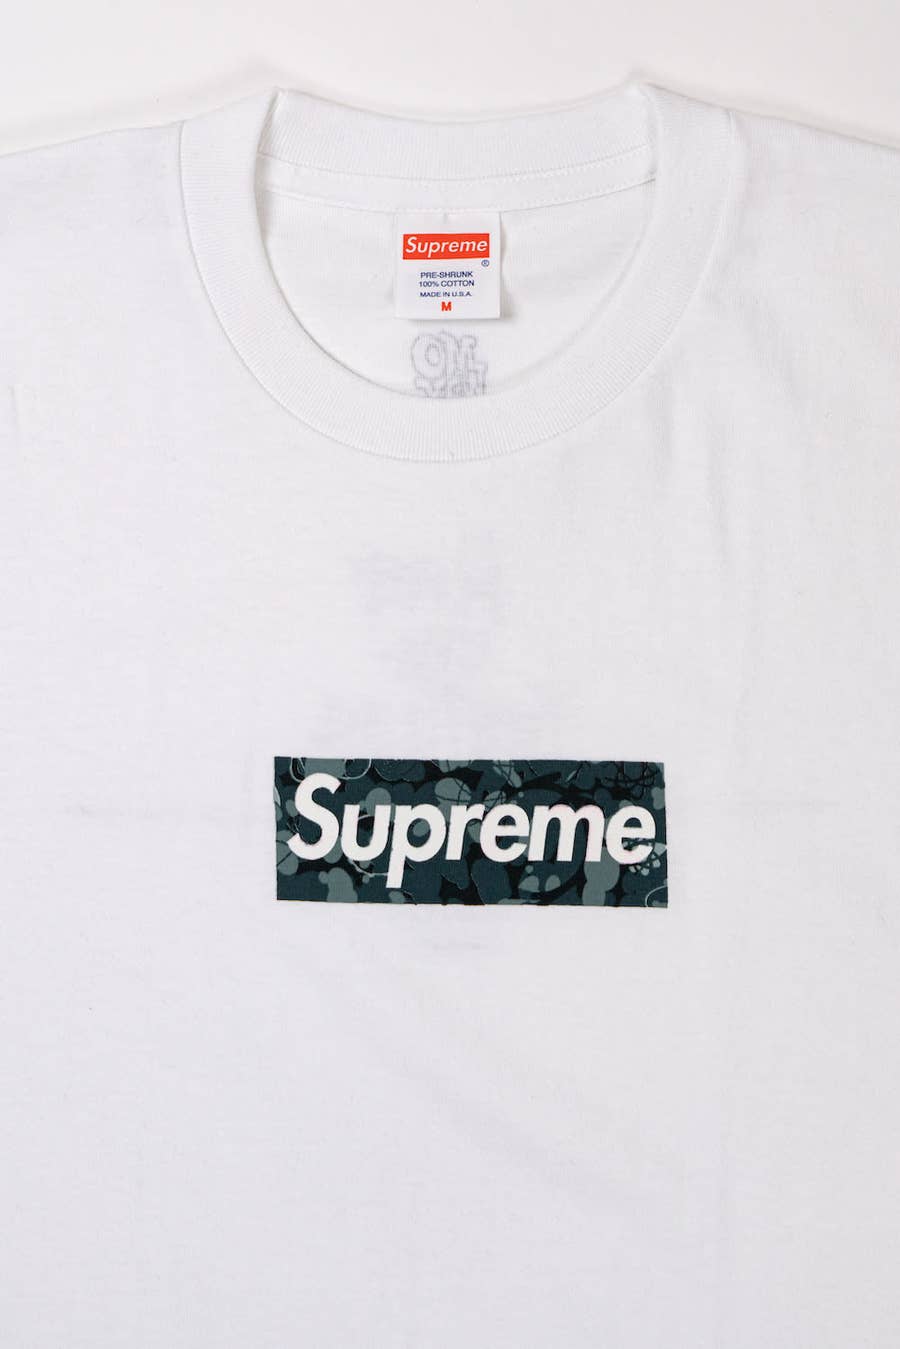 20-YEAR-OLD SUPREME T-SHIRT SOLD FOR $10,000 - Culted